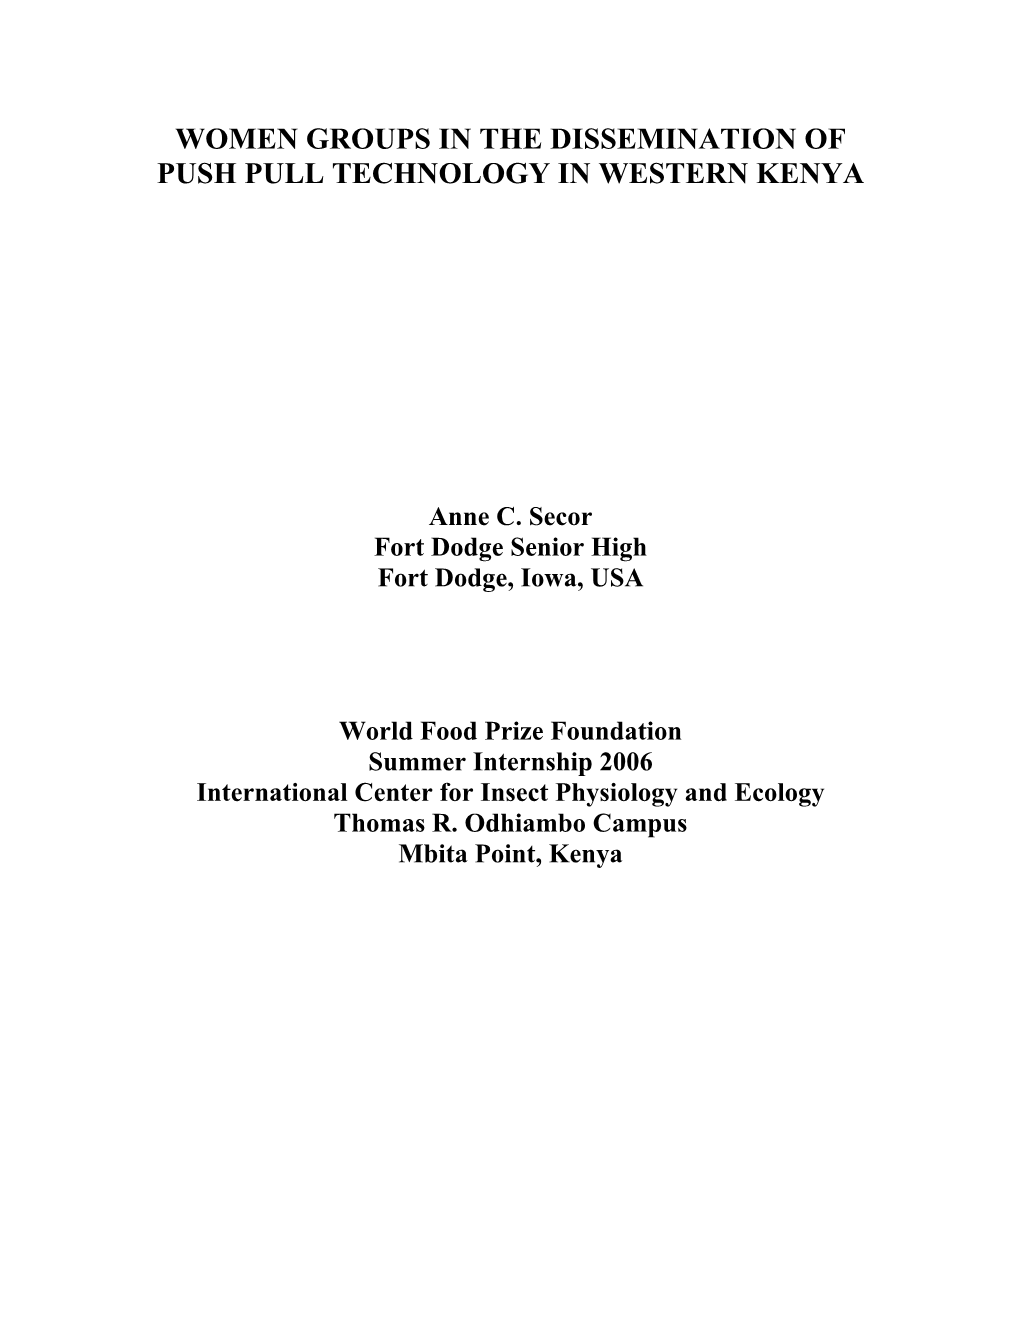 Women Groups in the Dissemination of Push Pull Technology in Western Kenya